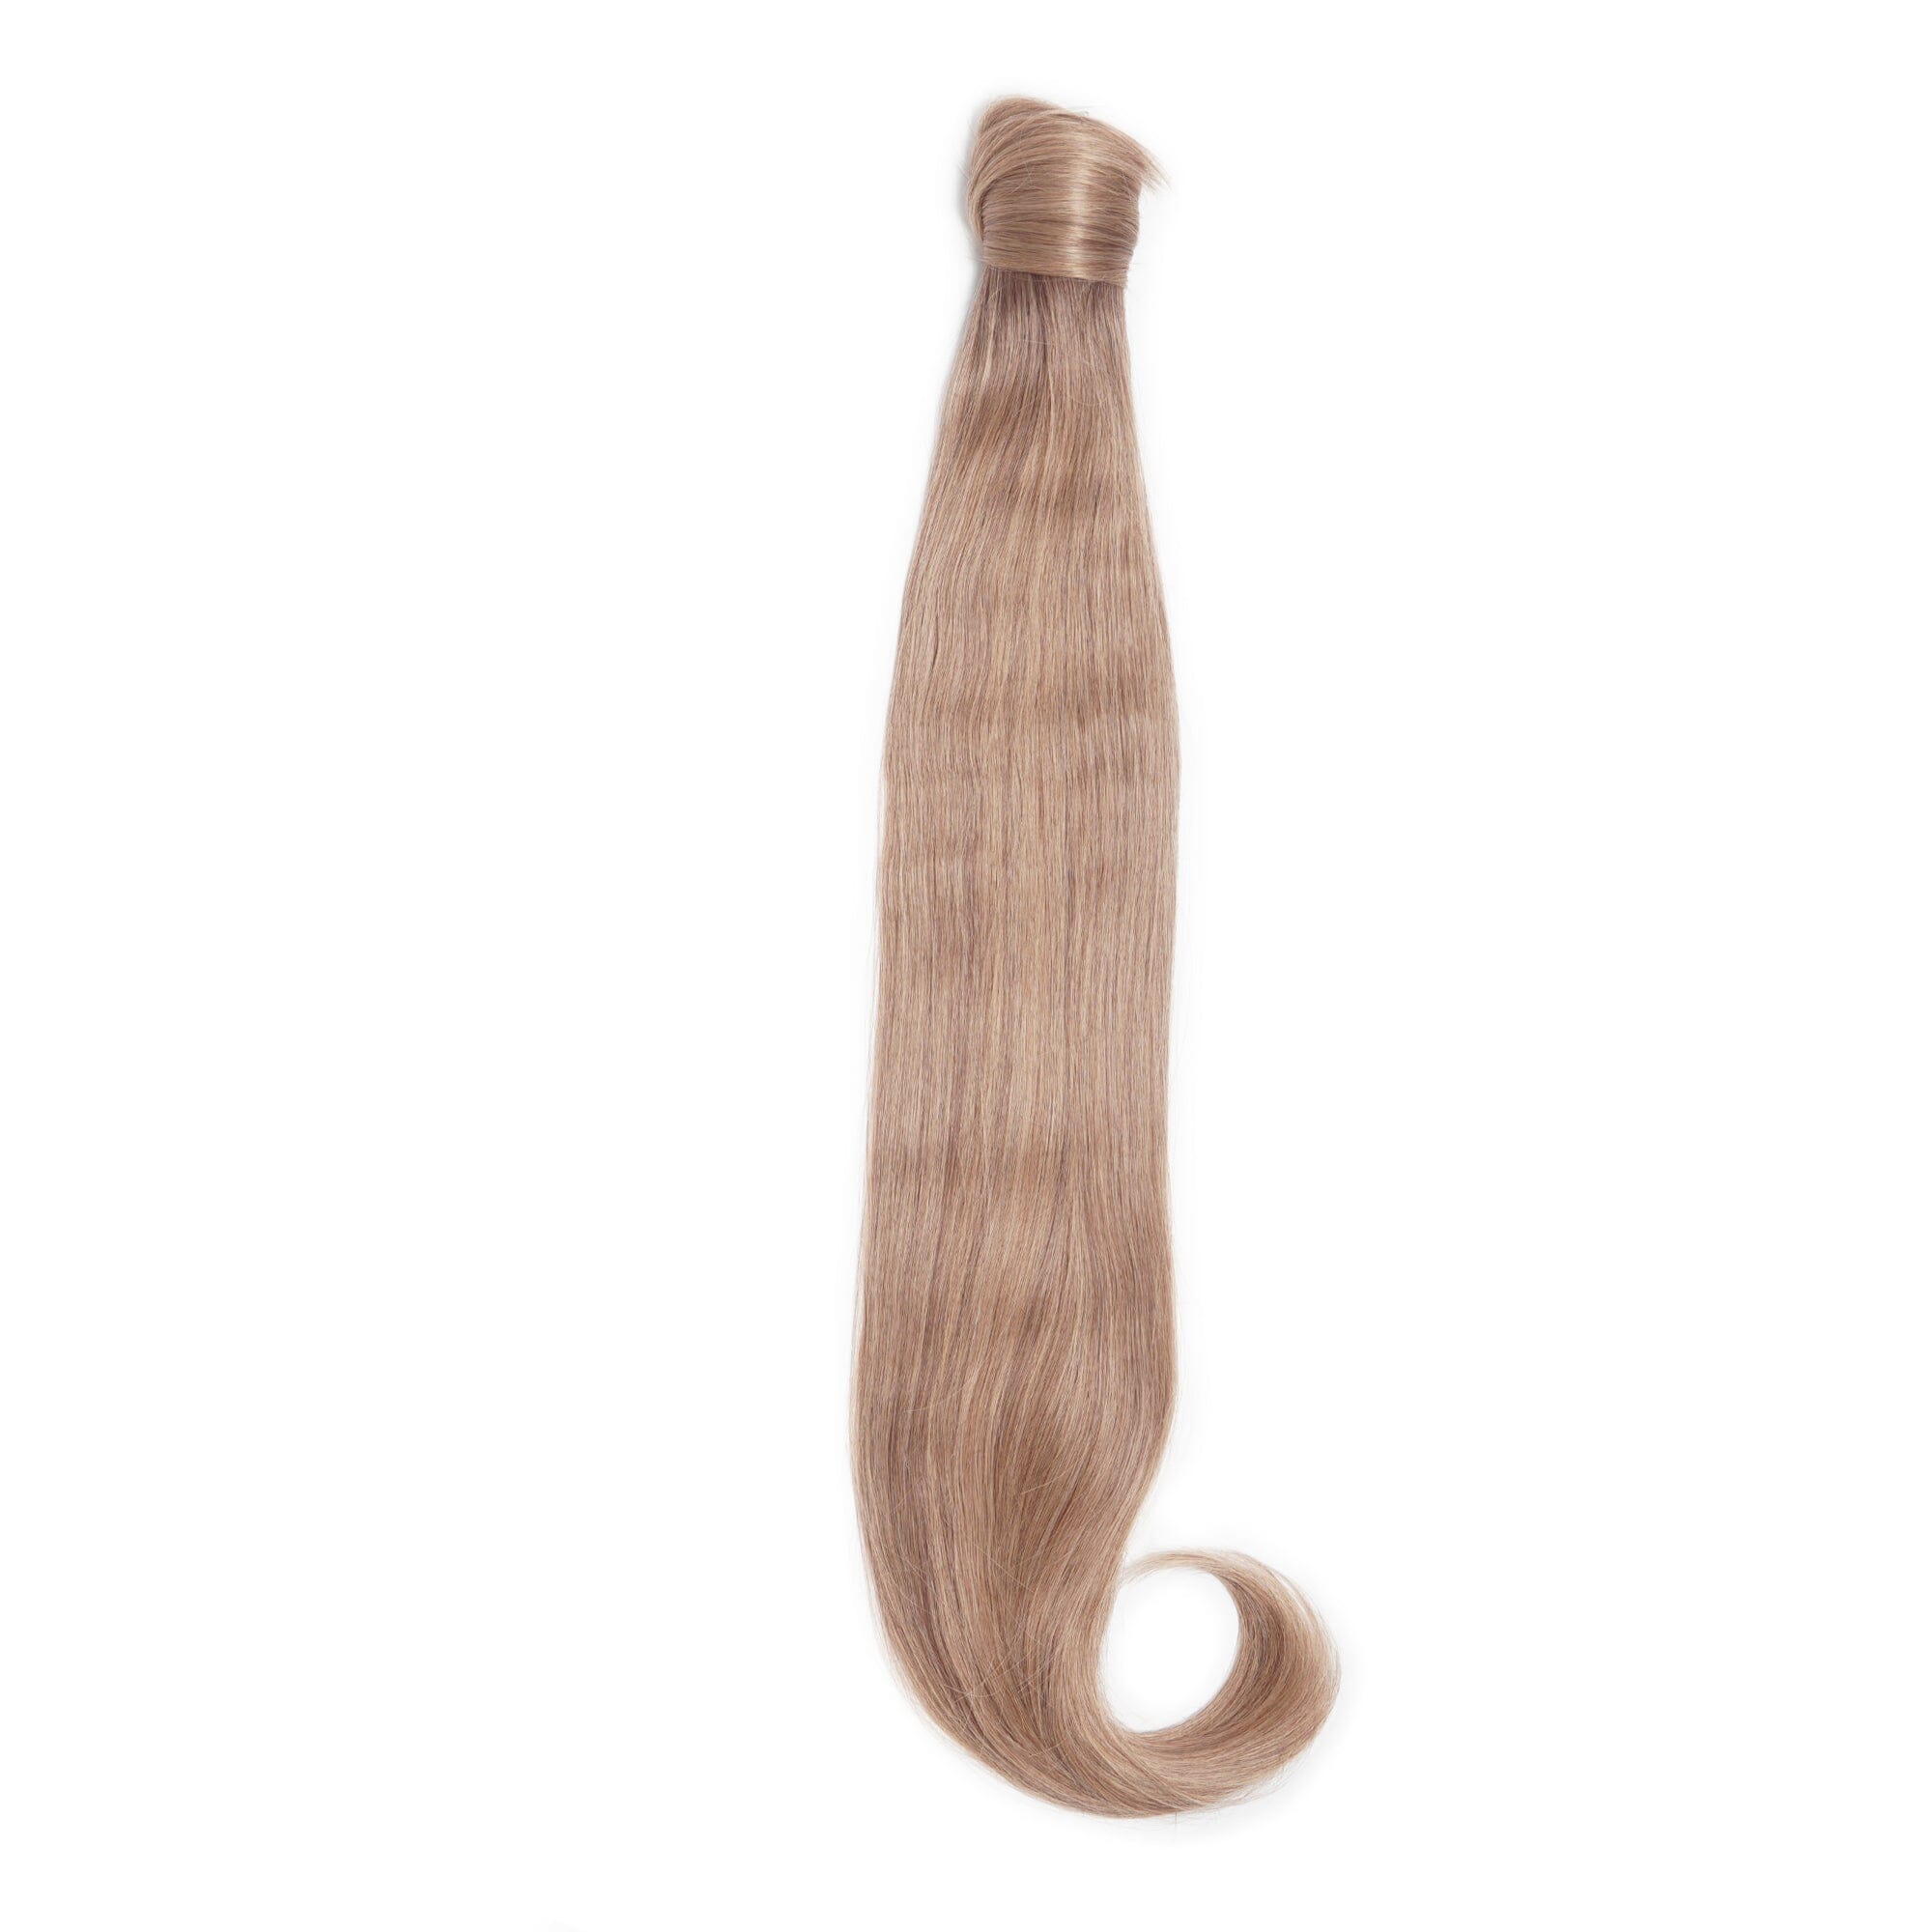 Long Clip-In Ponytails (22" - 30") Clip In Ponytail Easilocks 26" Silky Straight Bouncy Ponytail Caramel Twist 